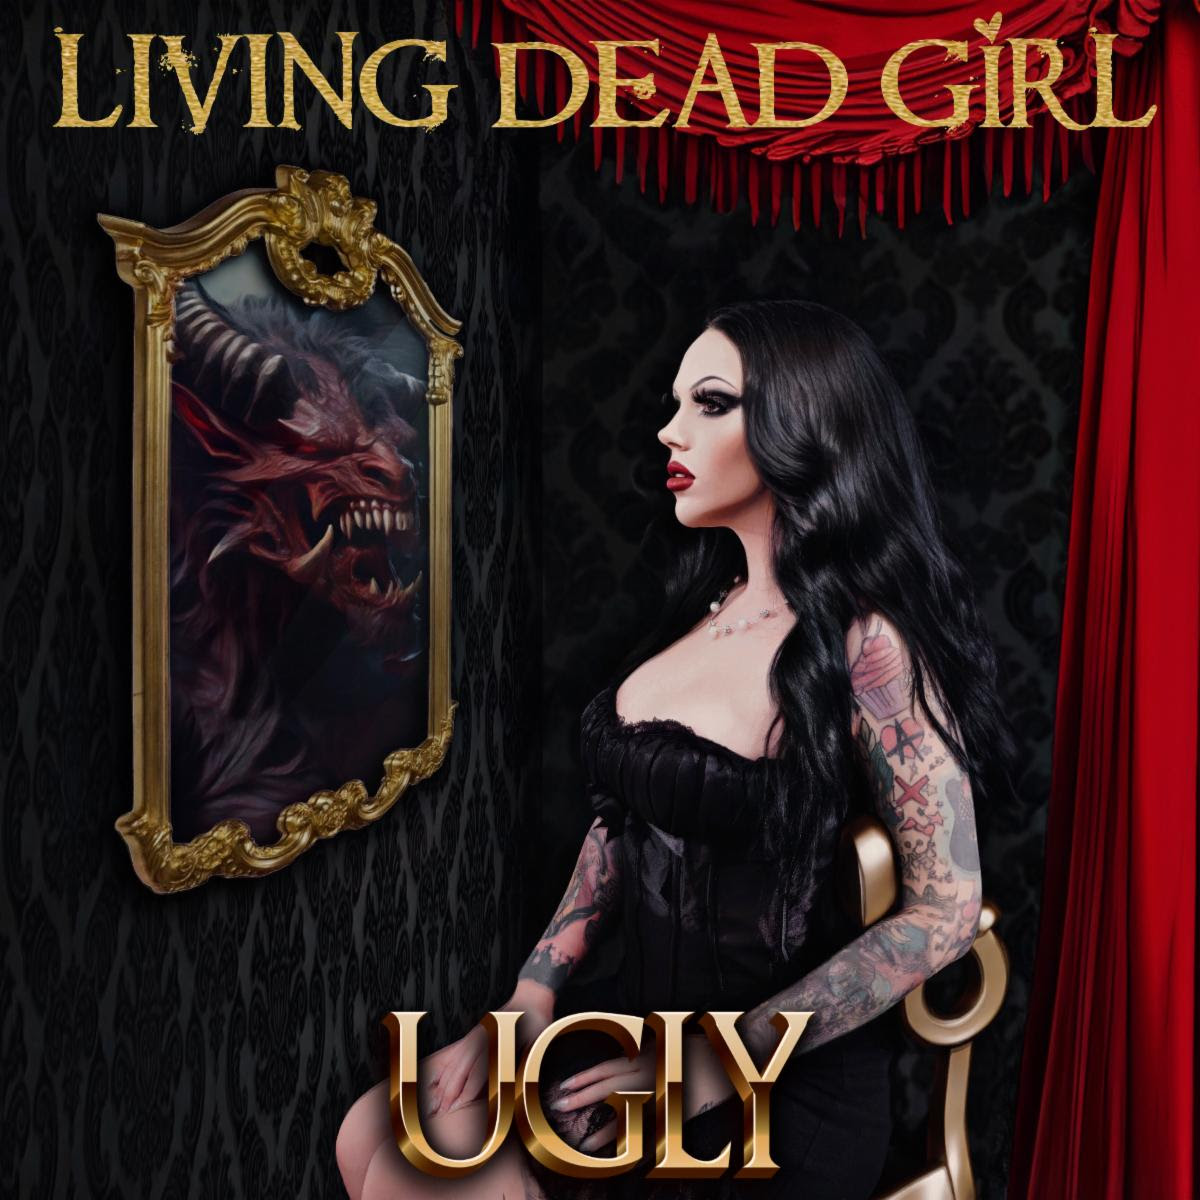 LIVING DEAD GIRL Drops Head-Turnng New Single “Ugly” March 15th.